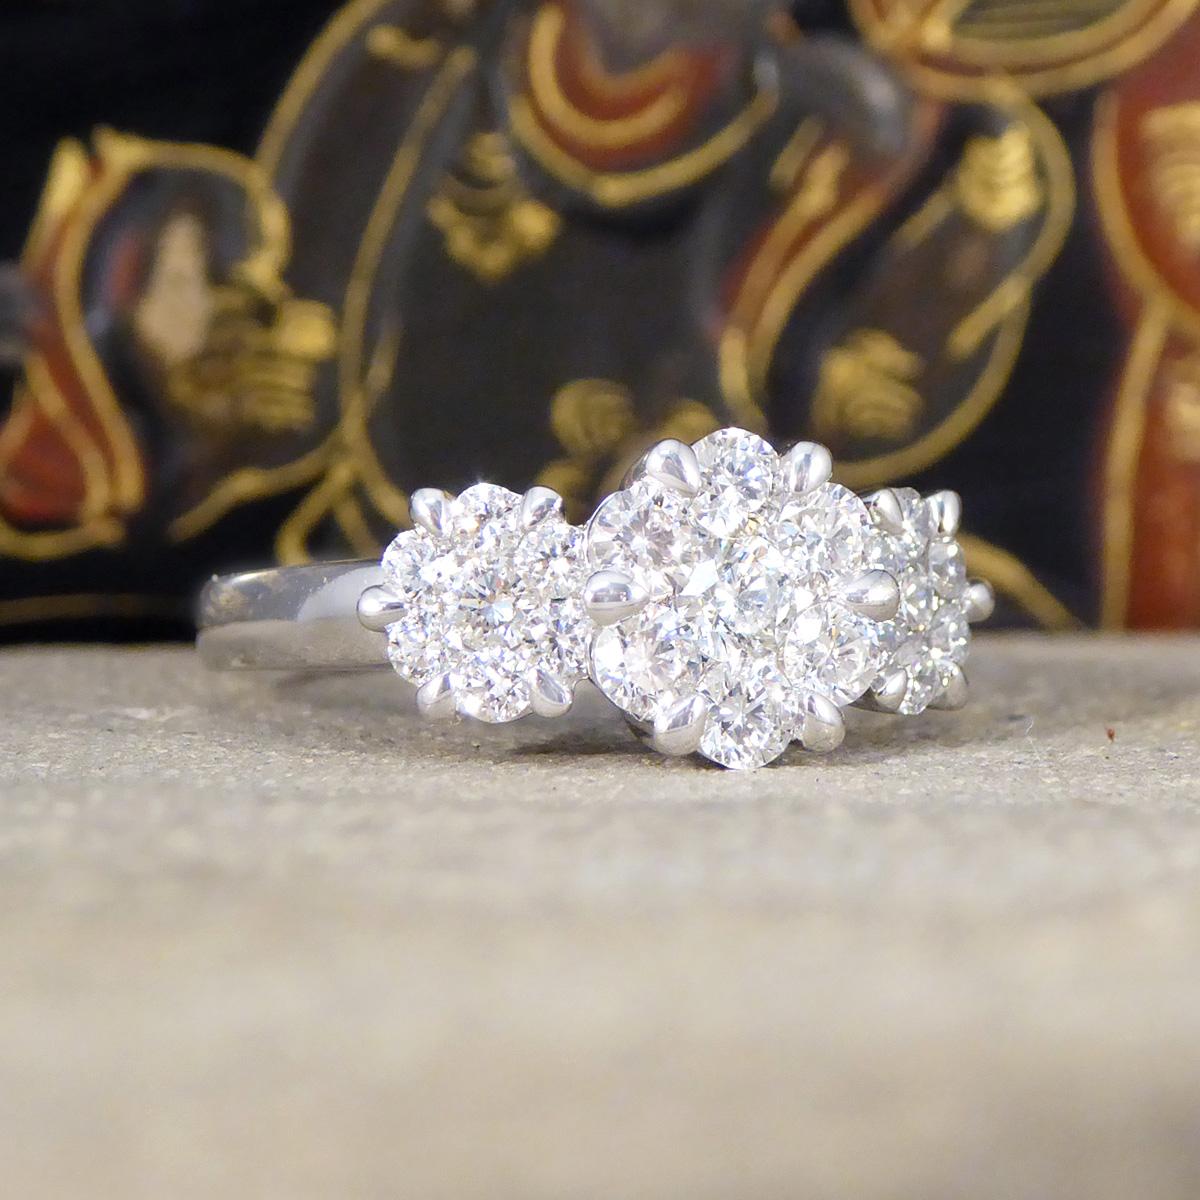 A gorgeous Diamond triple Daisy cluster ring—a pinnacle of sophistication and brilliance. The Diamonds are in a cluster to enhance sparkle and designed to created the illusion of a larger single stone creating the three stone arrangement in a